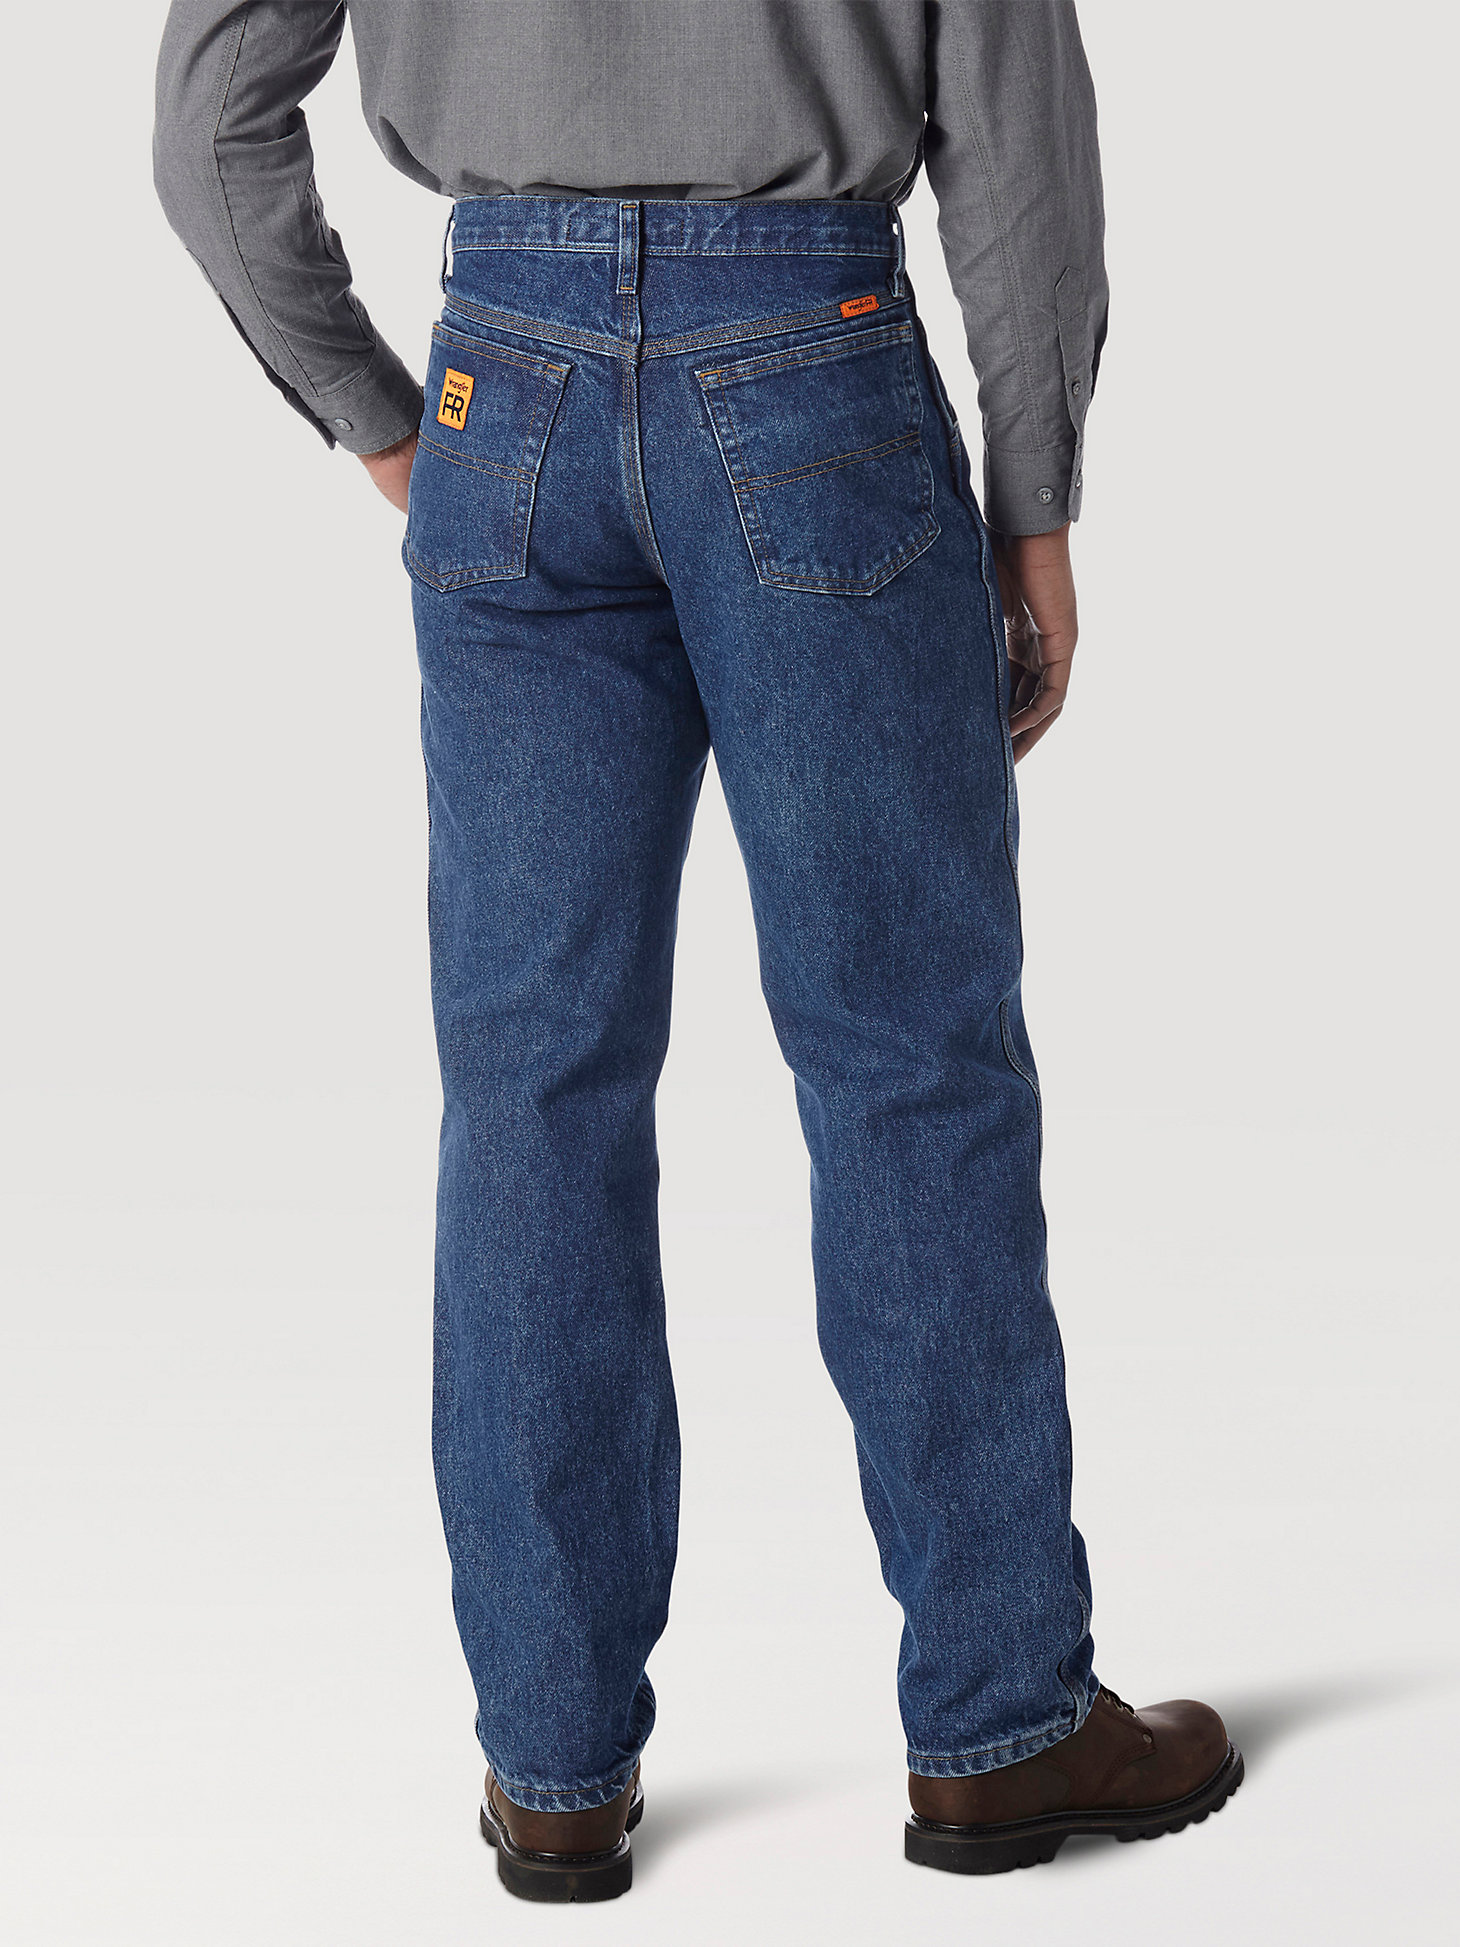 Wrangler® RIGGS Workwear® FR Flame Resistant Relaxed Fit Jean in FLAME RESISTANT alternative view 2